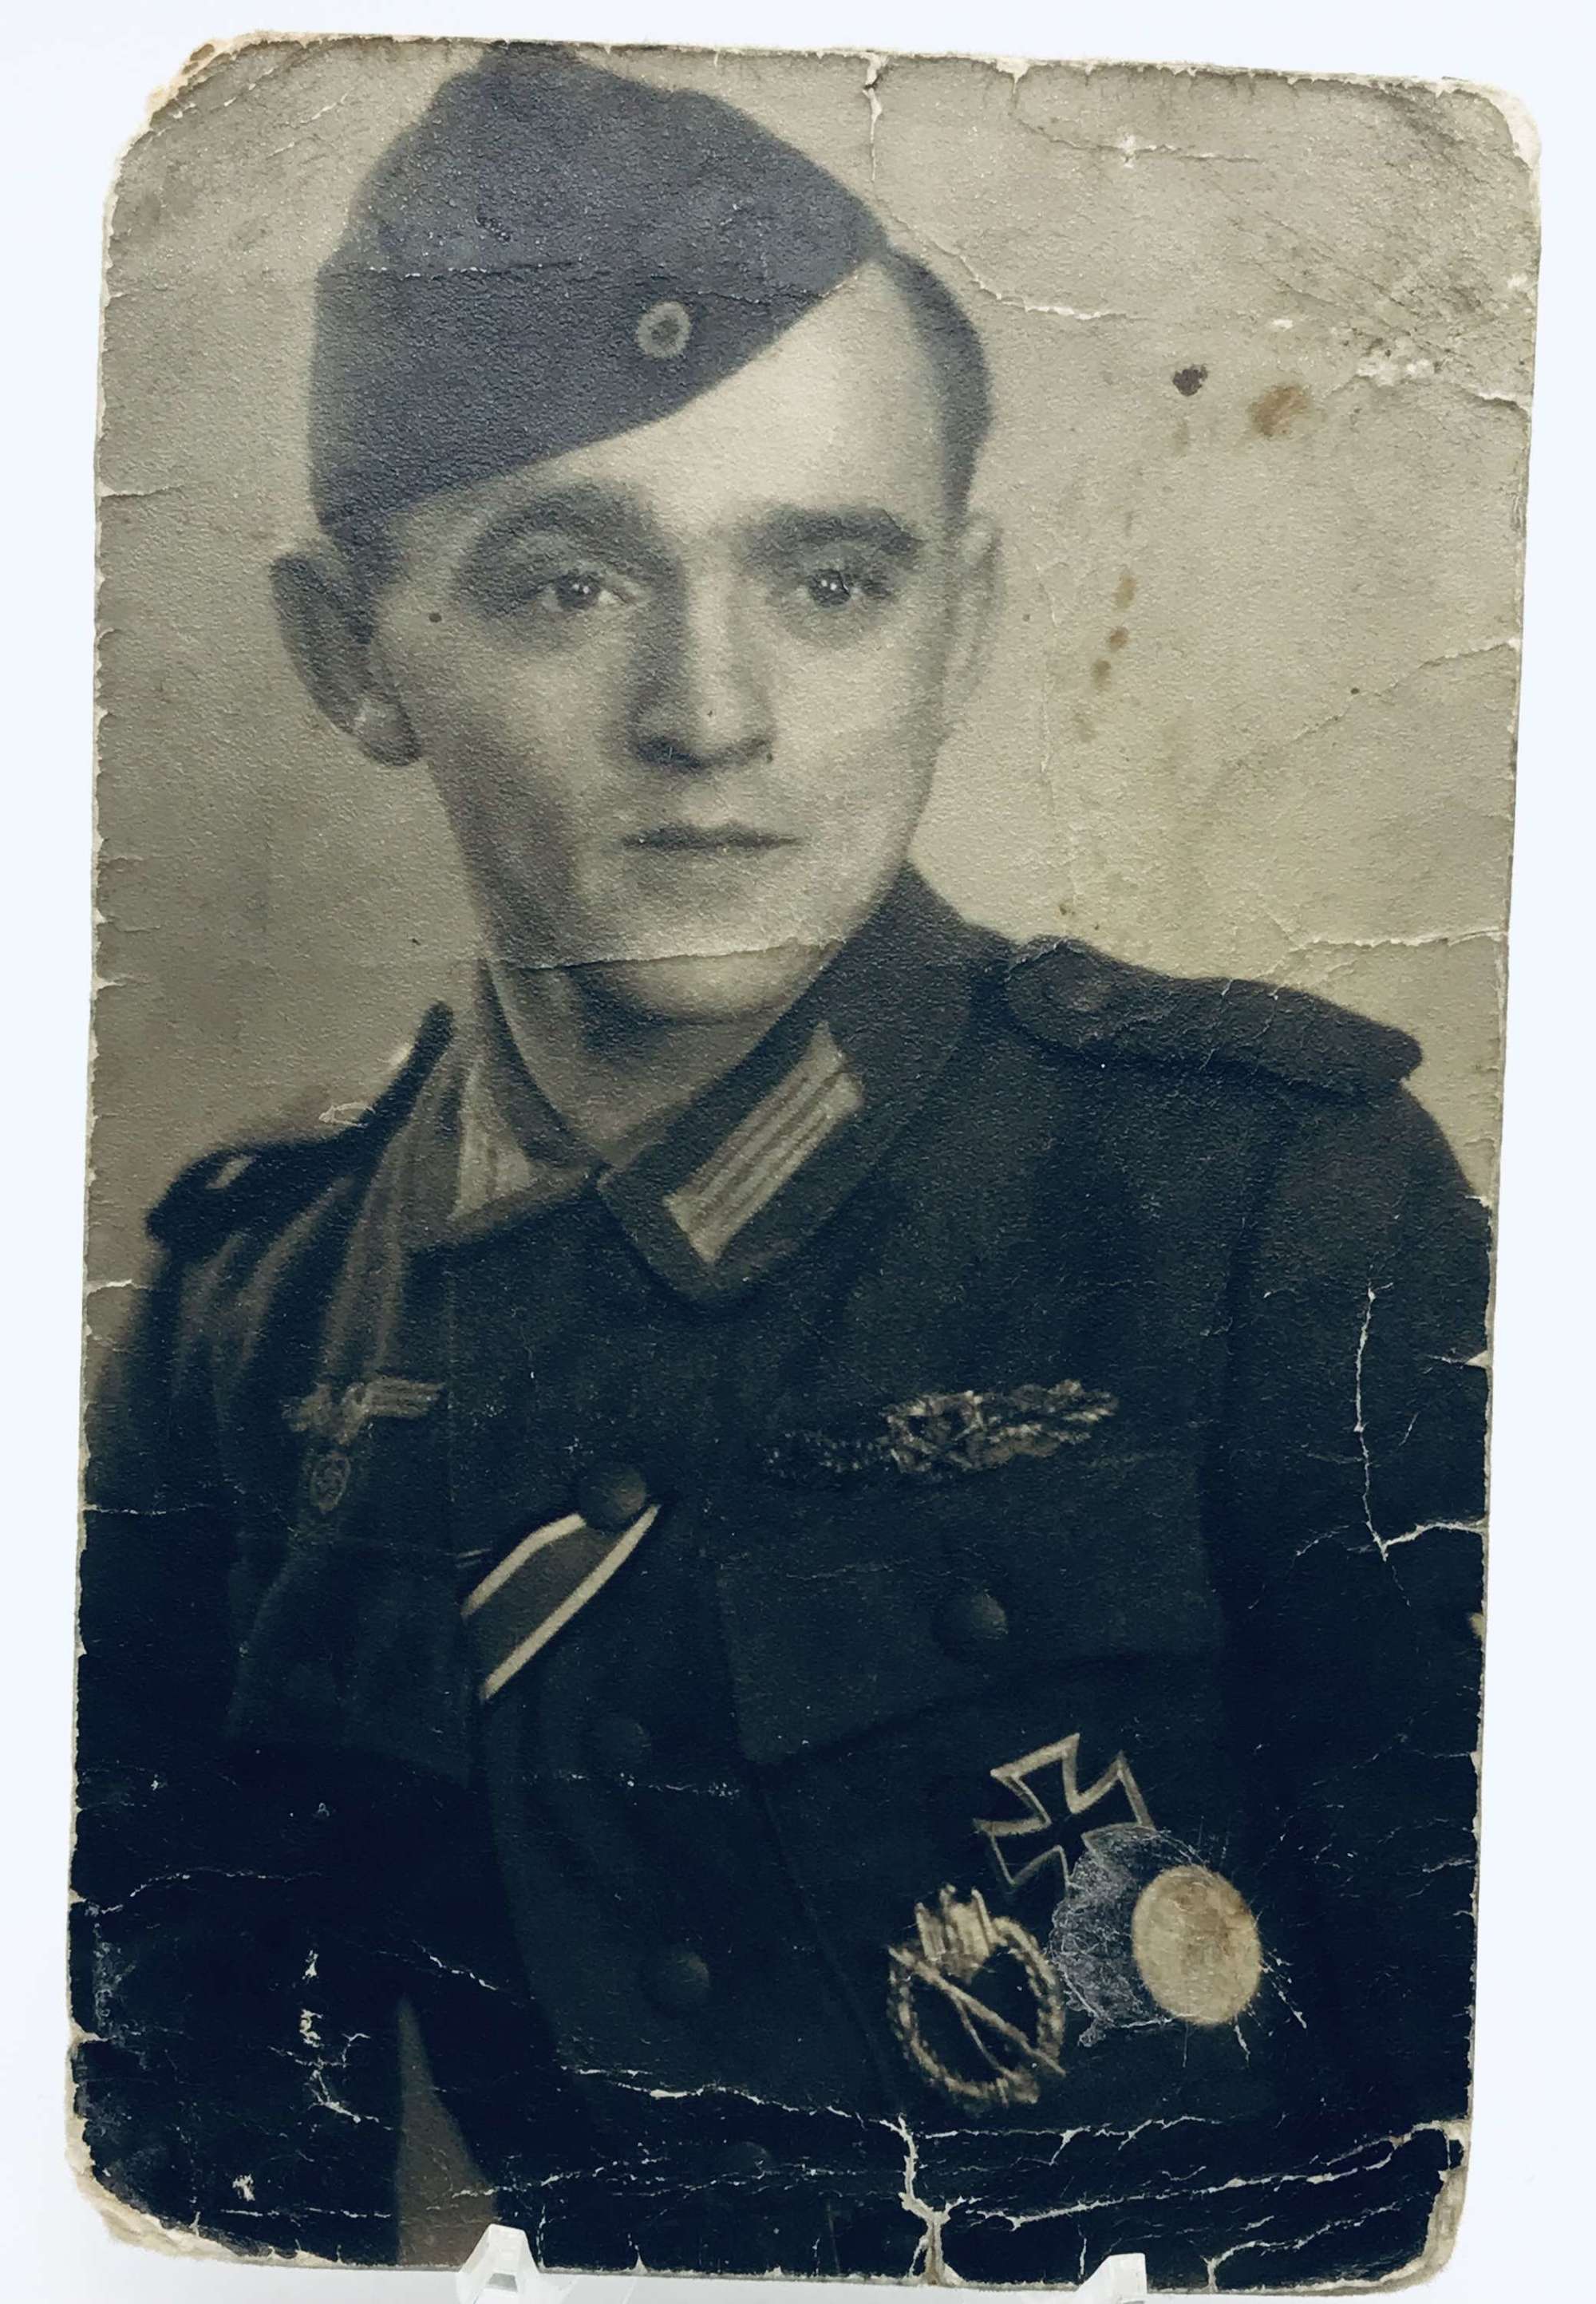 Image of highly decorated German soldier